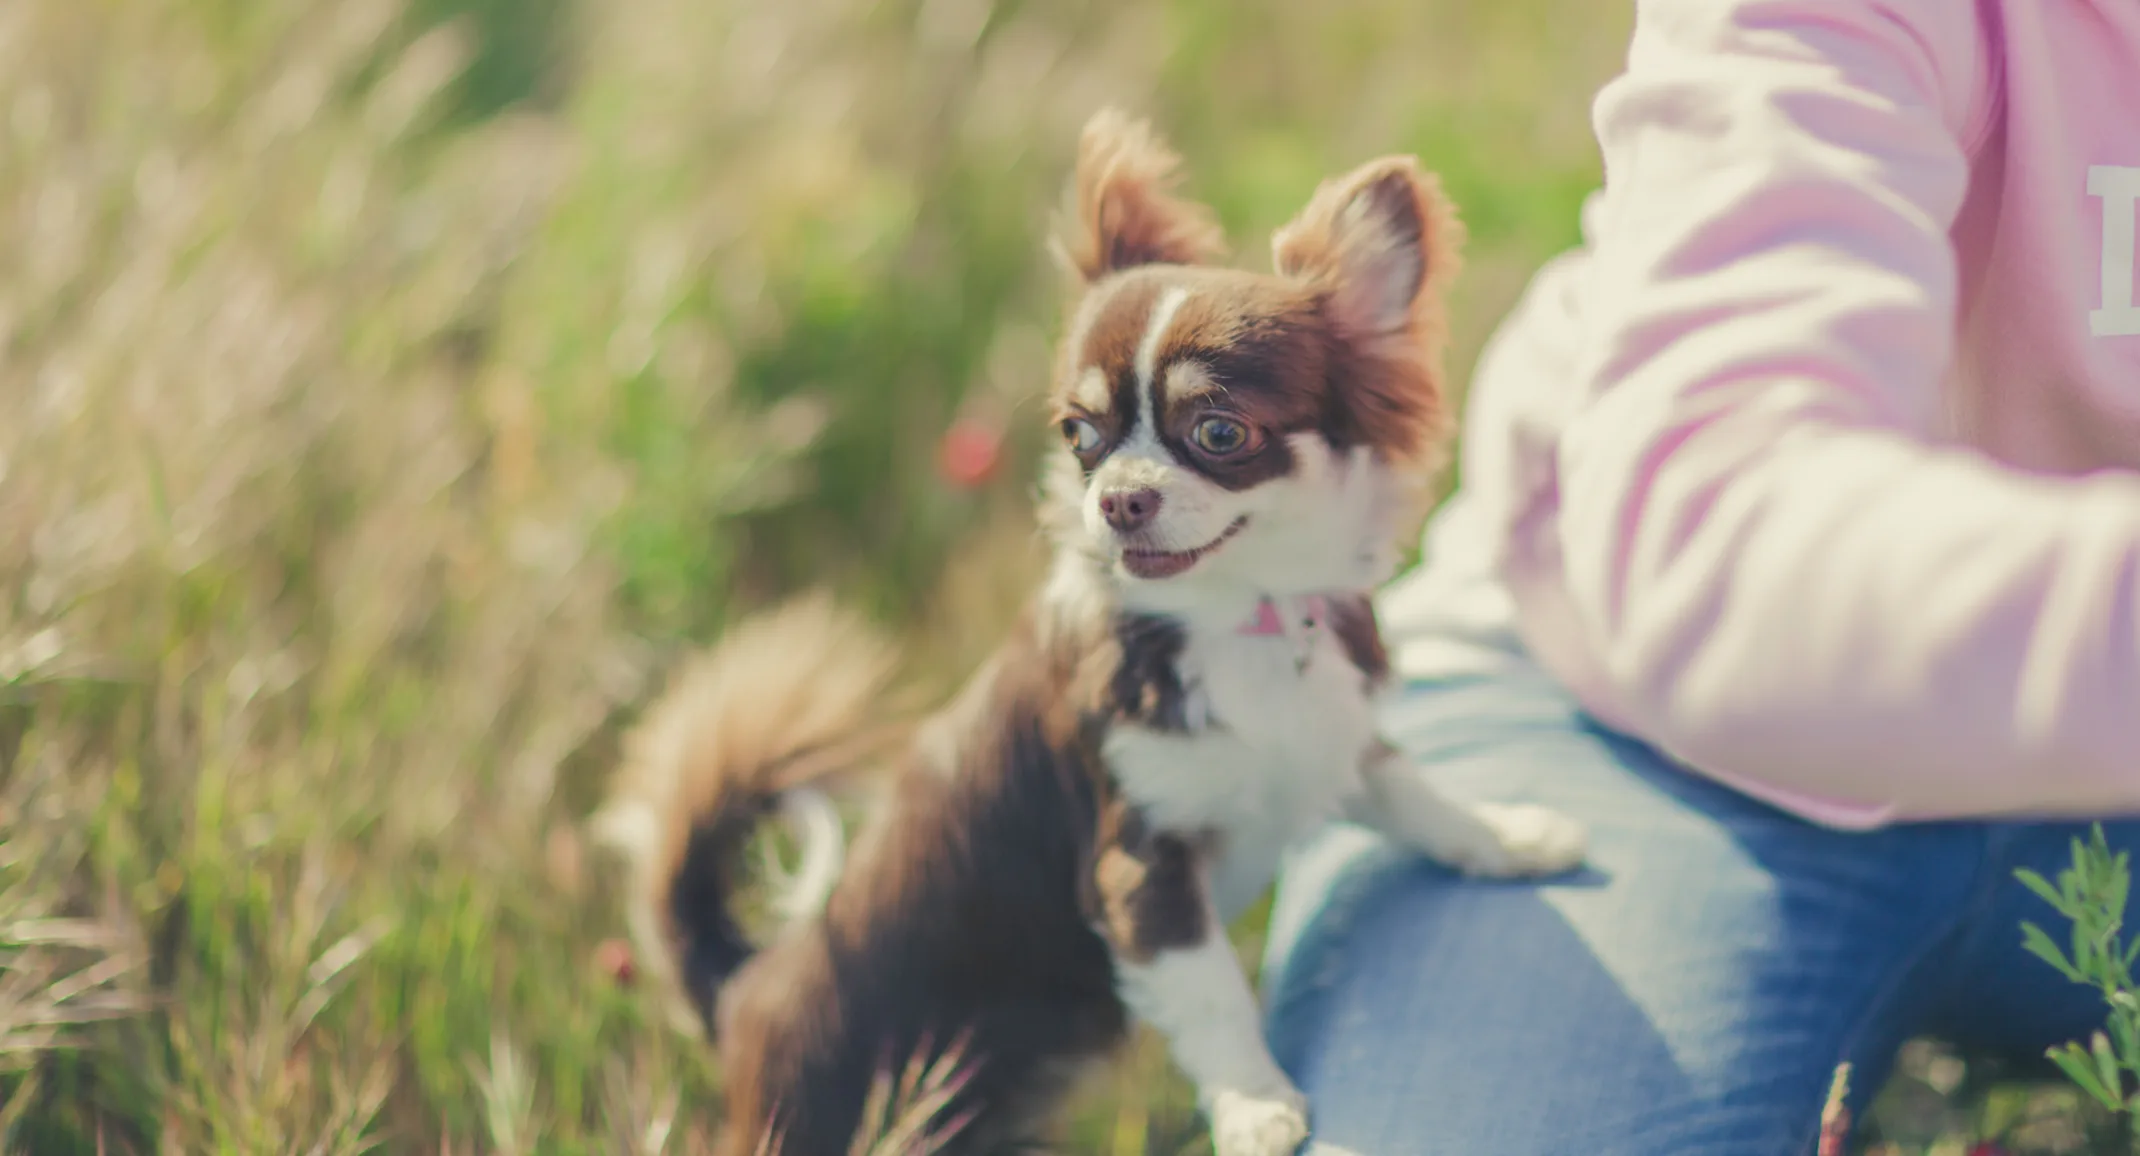 Chihuahua leaning up on persons leg in a field